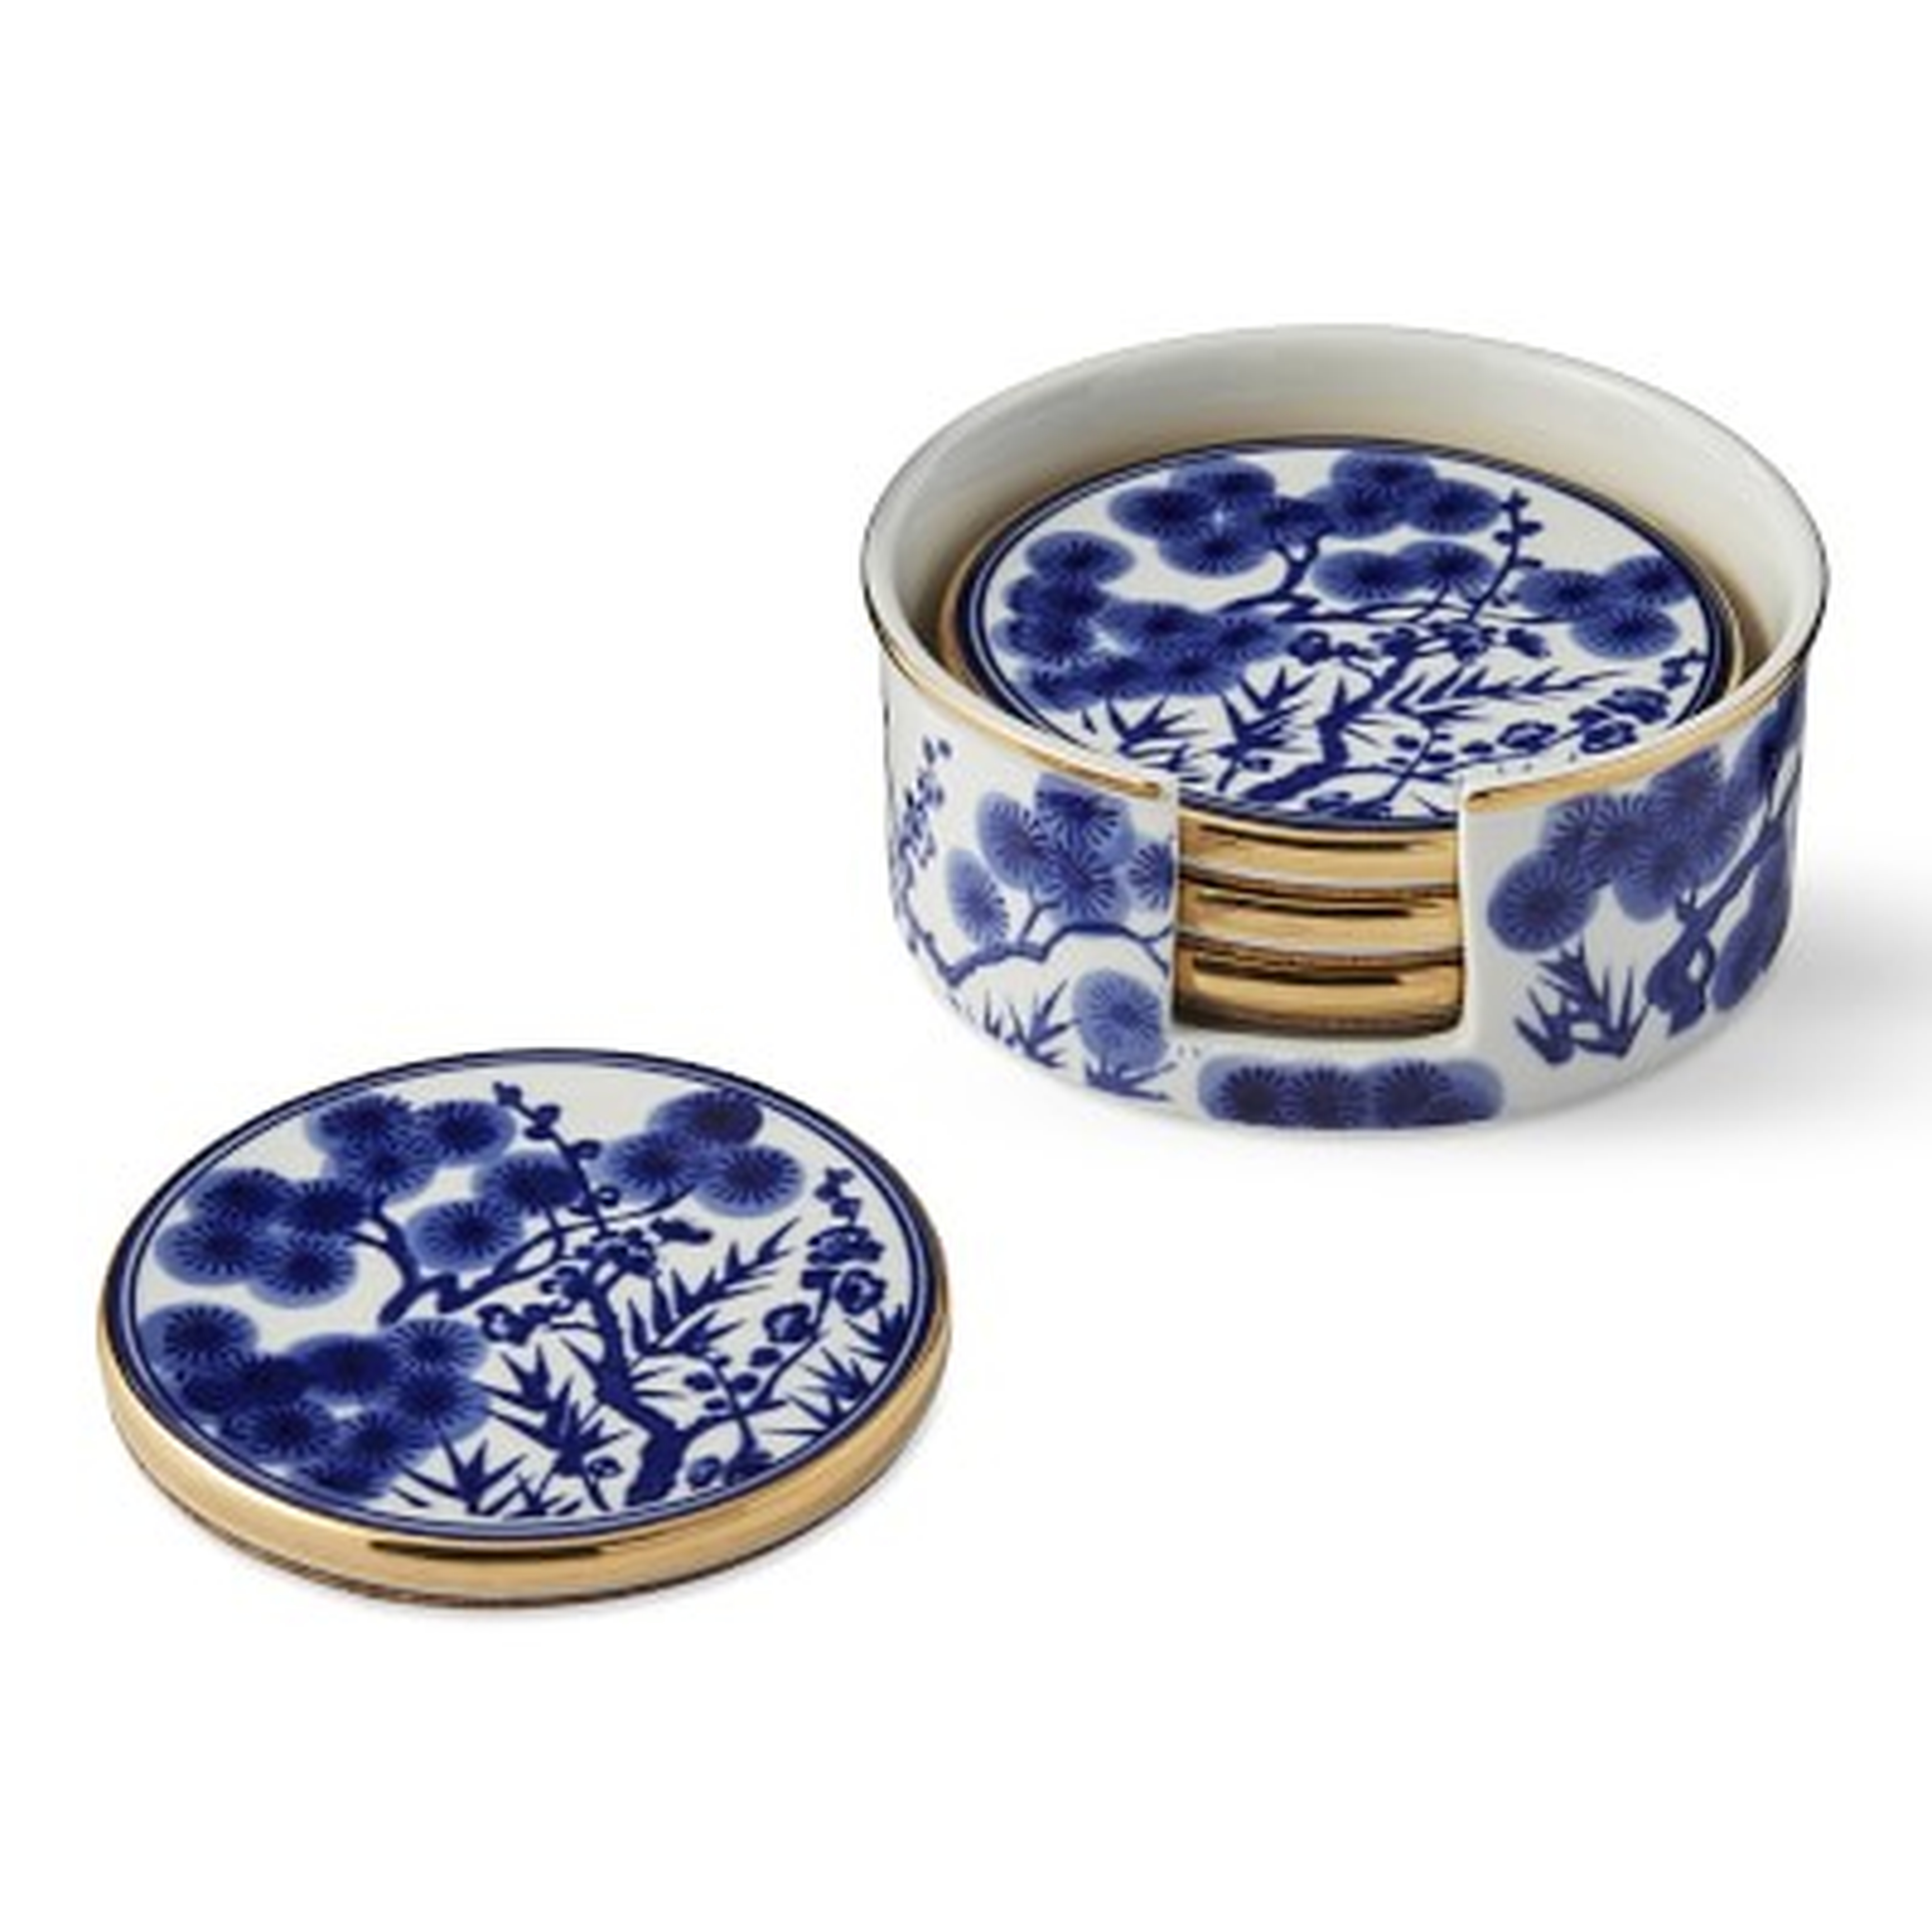 Chinoiserie Ceramic Coasters and Holder, Blue and White - Williams Sonoma